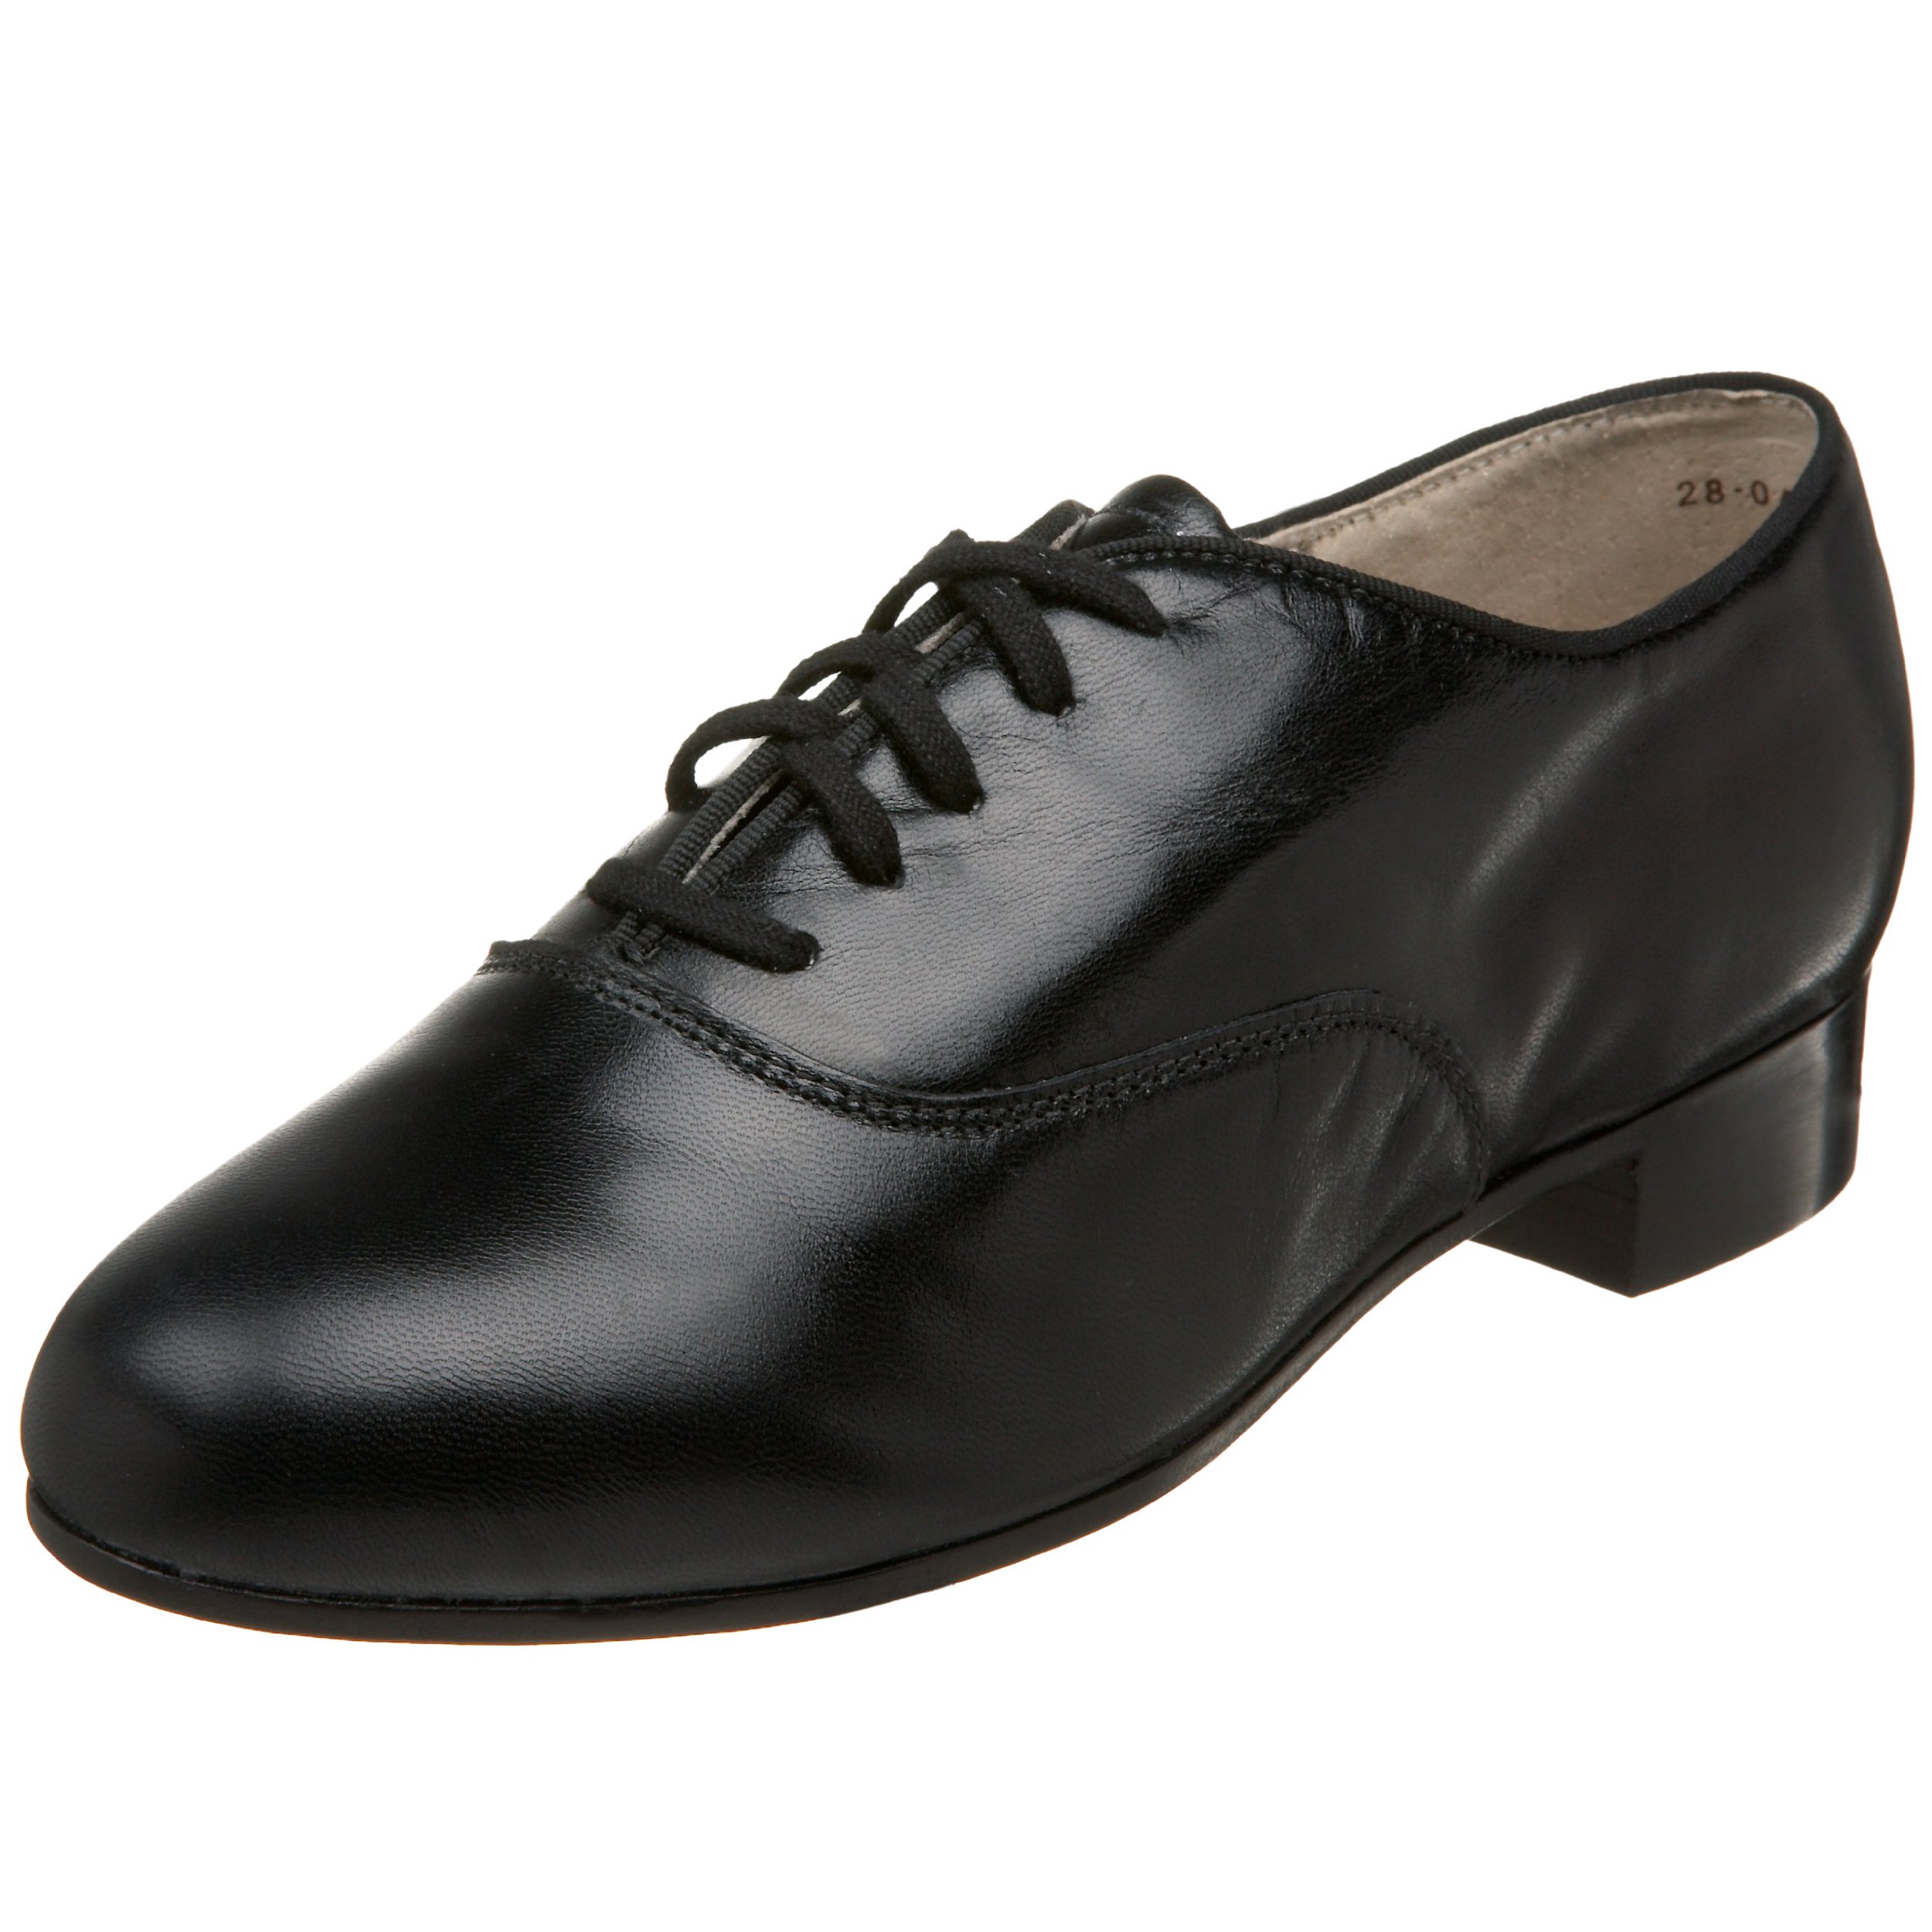 Capezio unisex-adult Character/Tap Theatrical Oxford,Black,7 W US